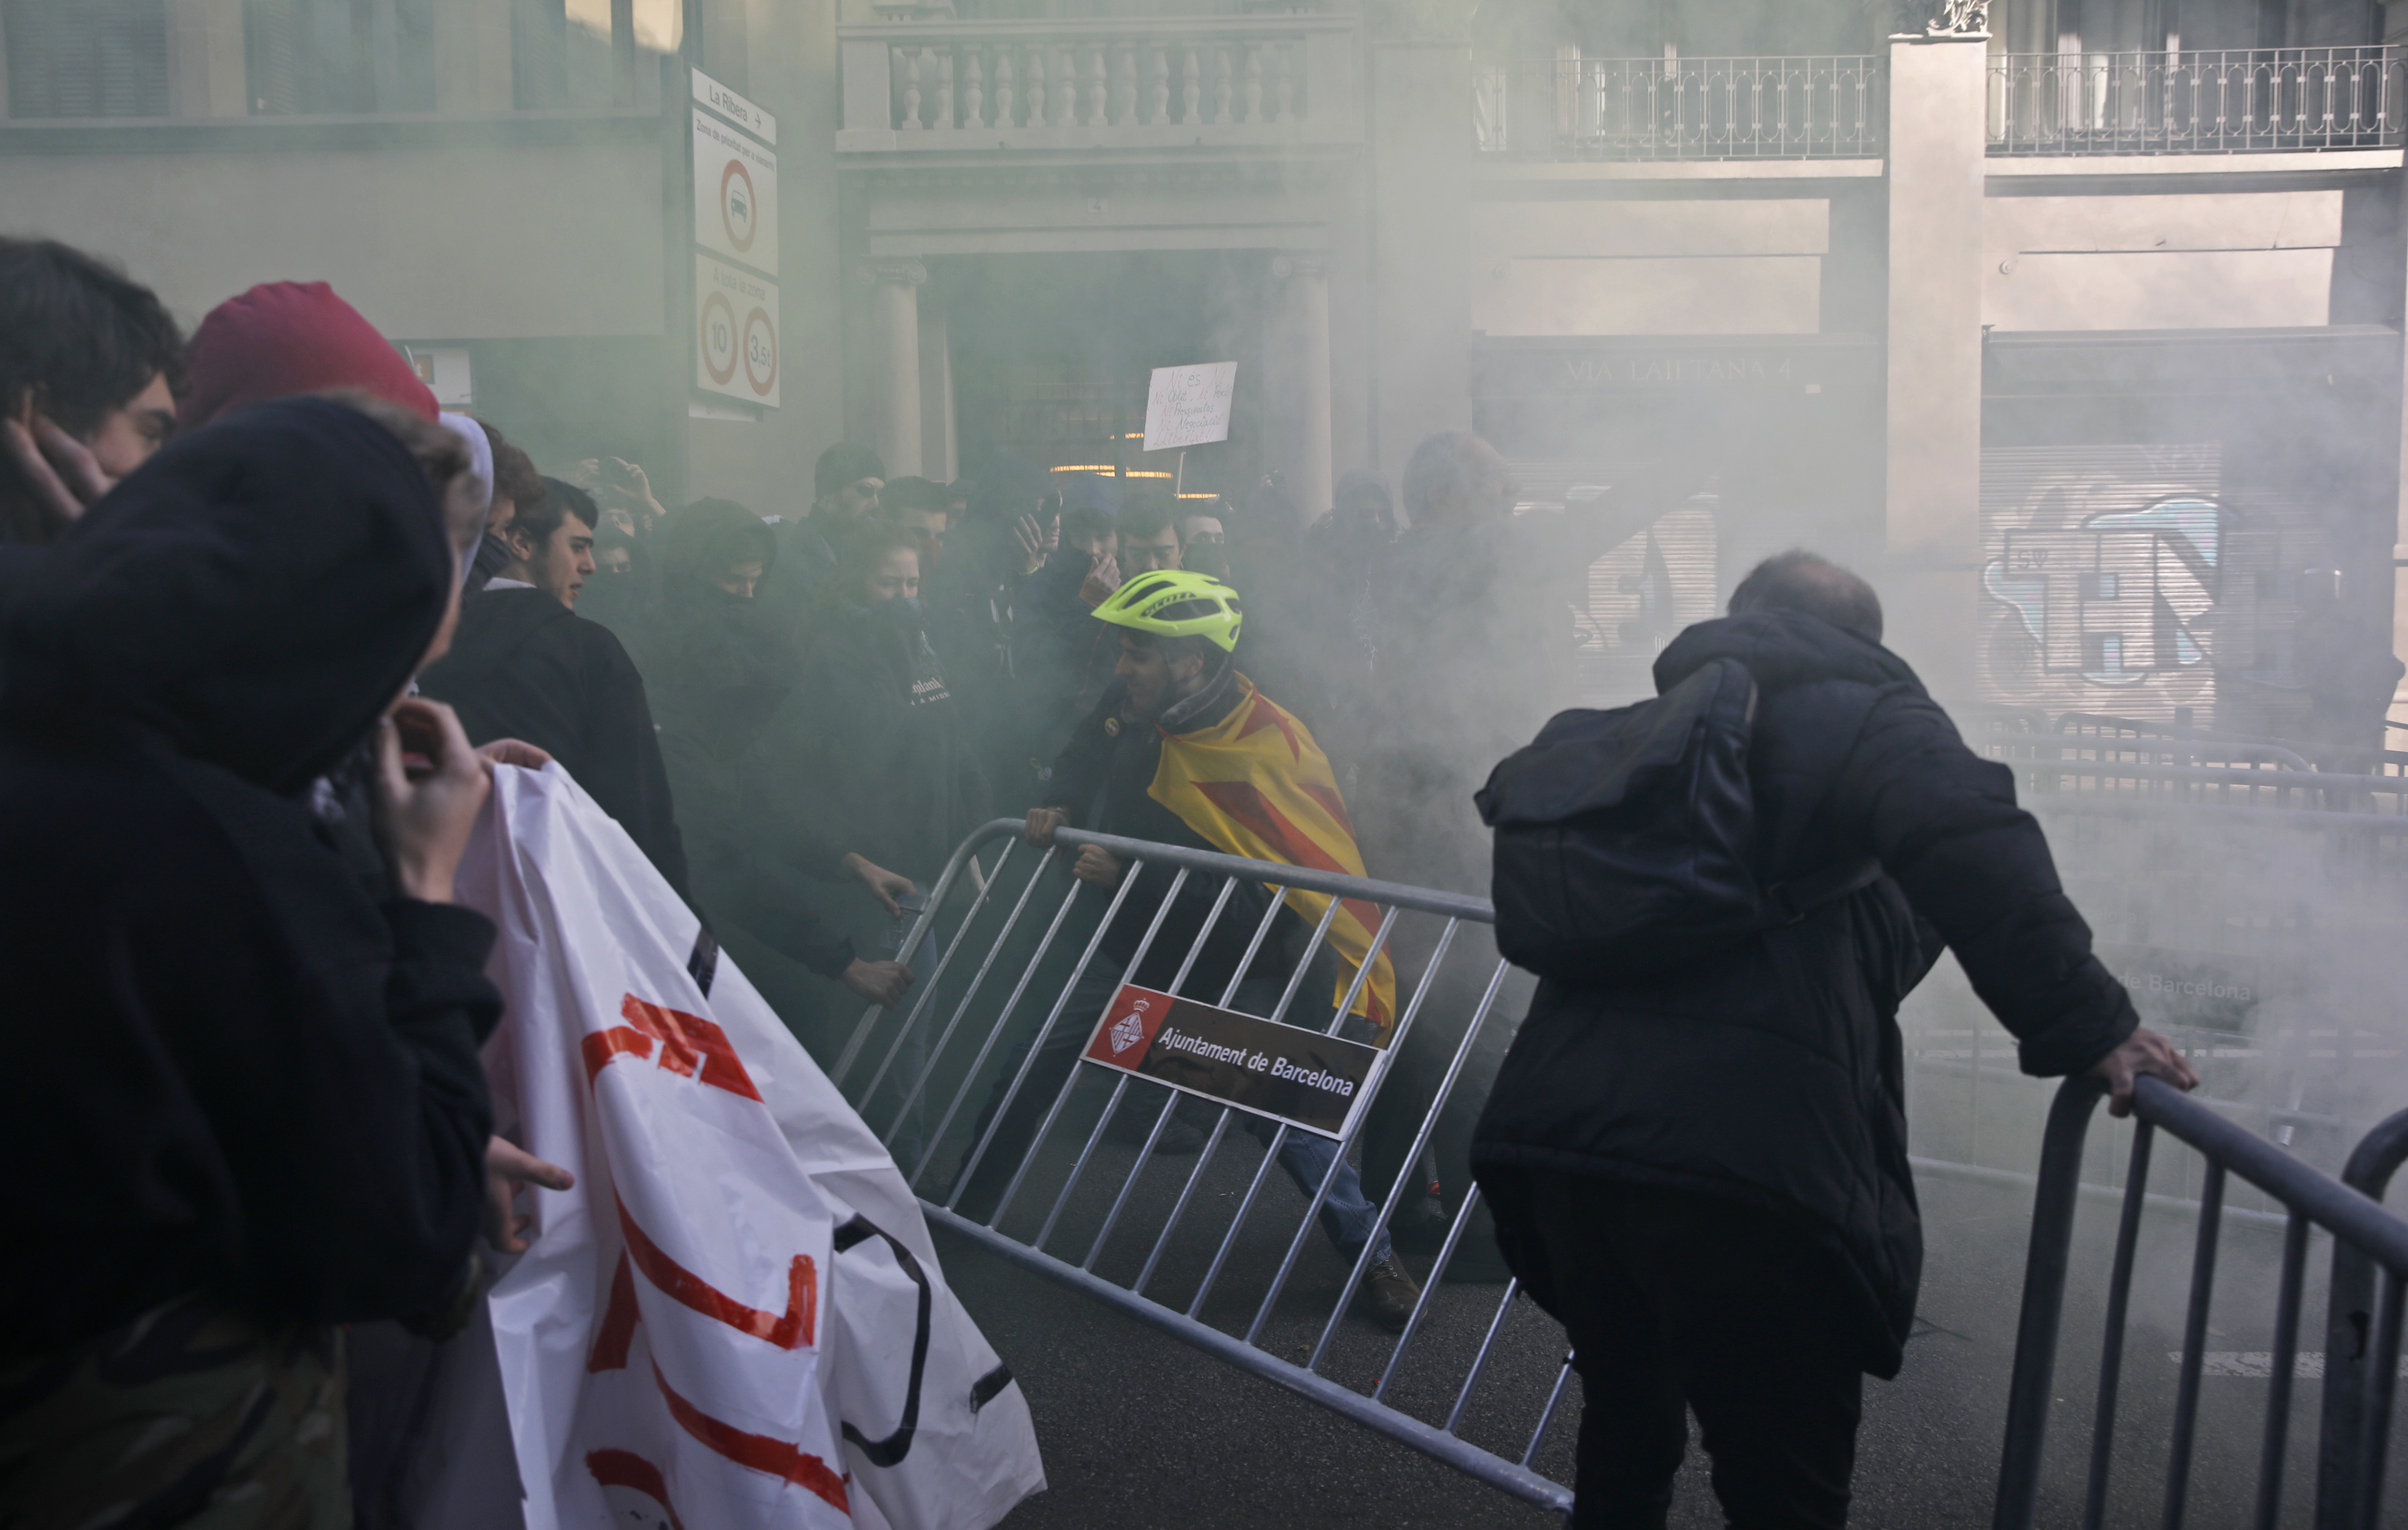 Engulfed by smoke caused by flares used by protesters, pro-independence demonstrators remove a fence blocking access to the area where Spain's cabinet is holding a meeting in Barcelona Spain, Friday Dec. 21, 2018. Some scuffles have broken out between protesters trying to reach the venue of the cabinet meeting and police trying to stop them on Friday in central Barcelona after pro-independence organizations called for peaceful demonstrations against the meeting across the city.(AP Photo/Emilio Morenatti)